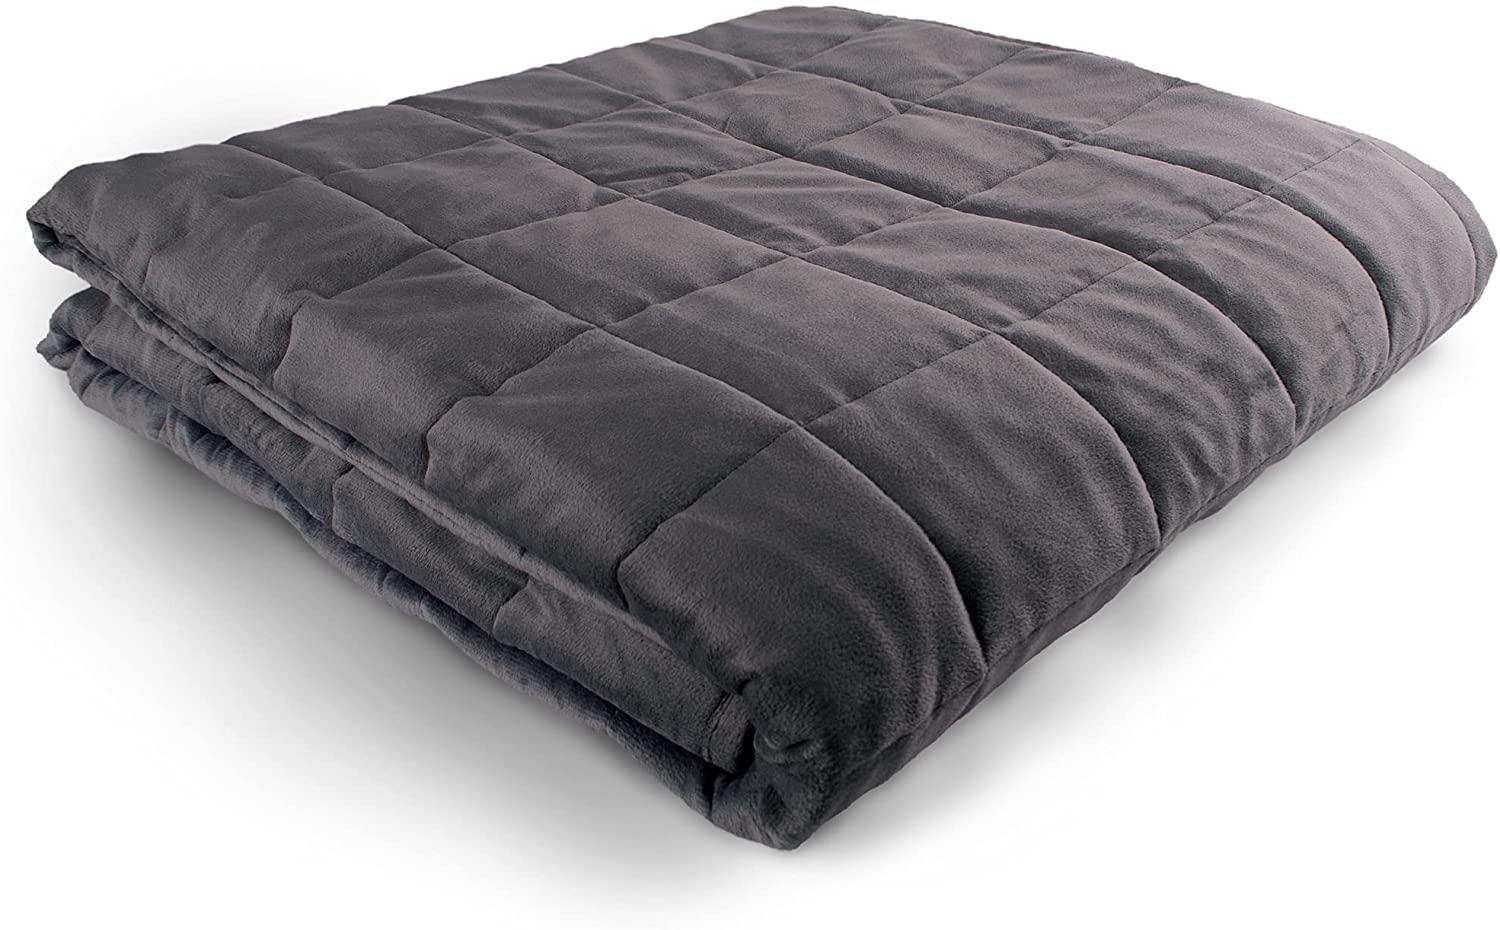 60x80 Weighted Queen King Size Blanket for $32.99 Shipped